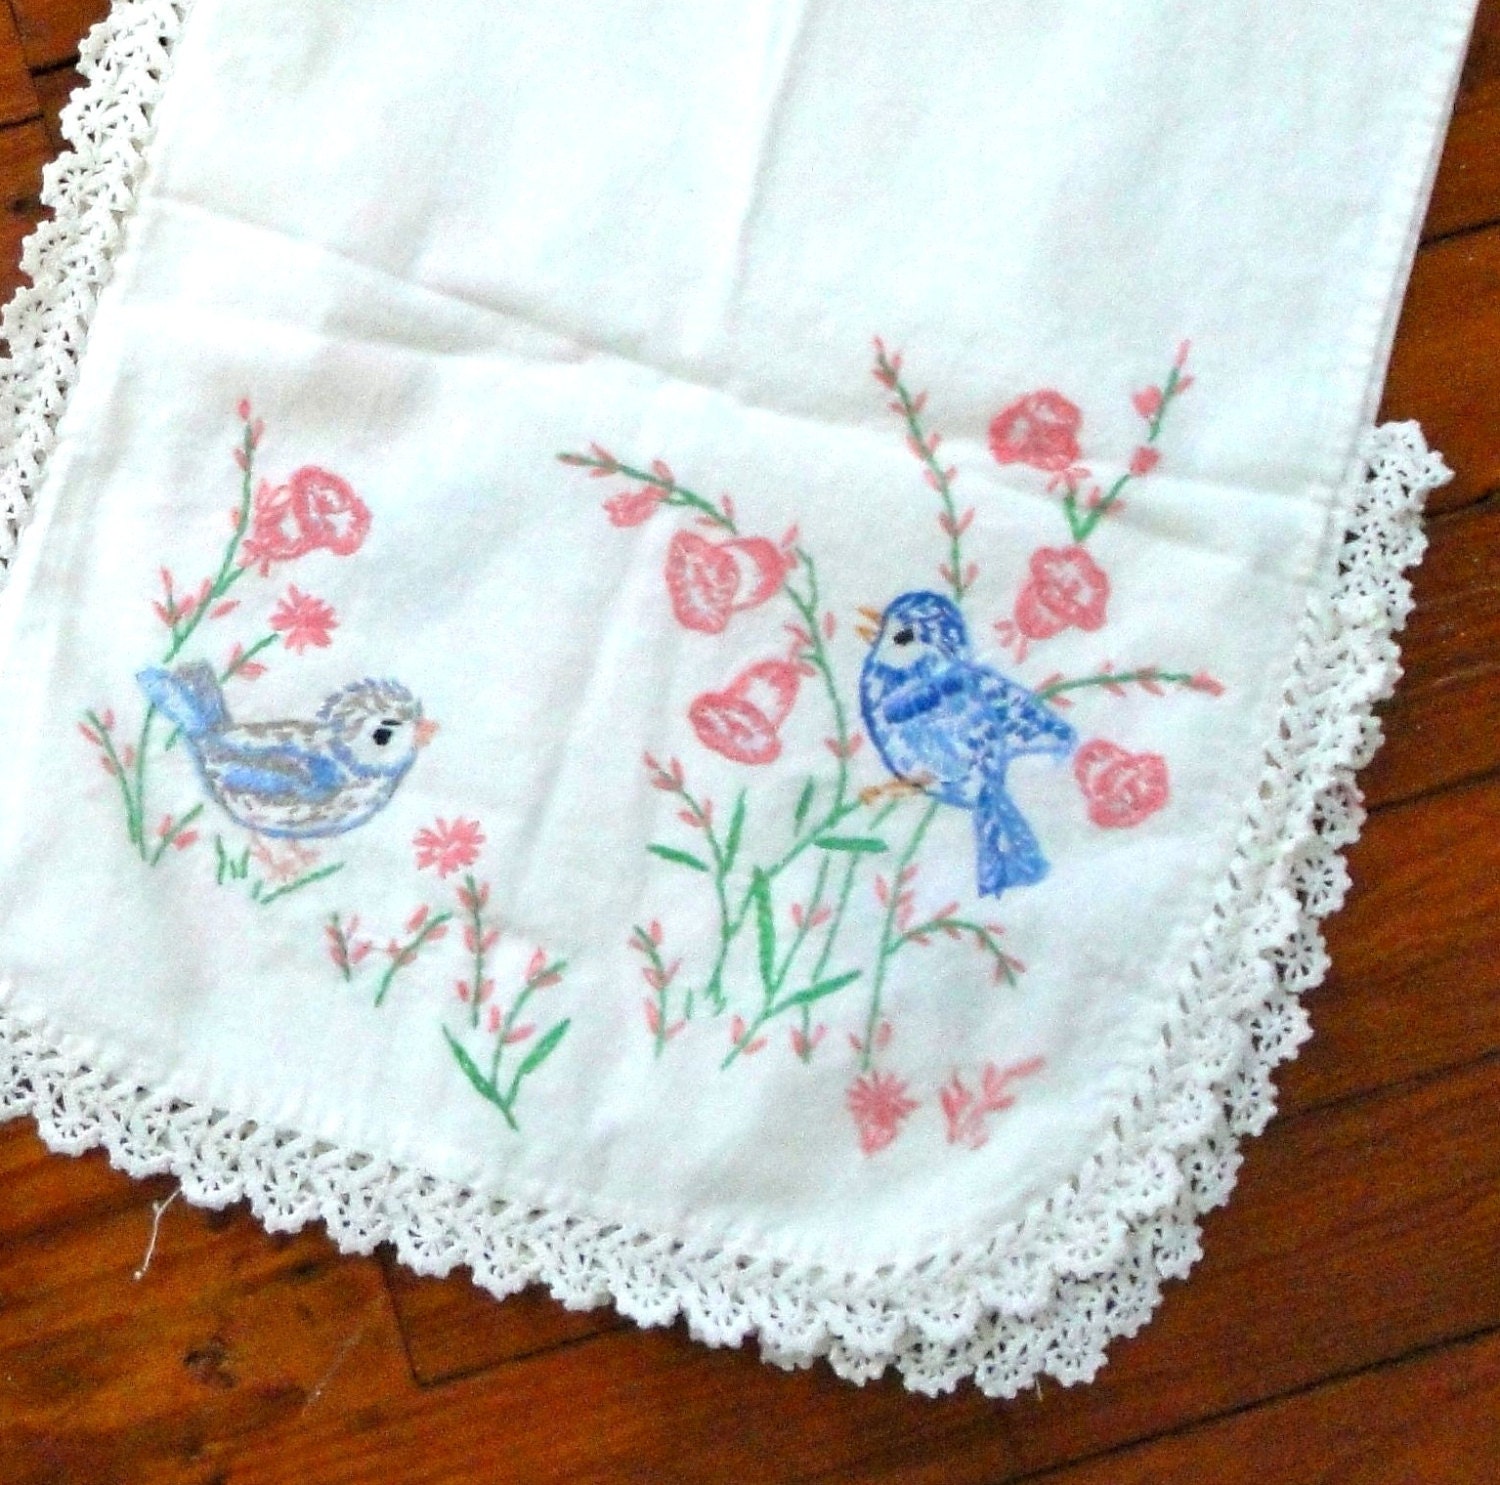 Vintage Embroidery Bird Table Runner by VintageJunkInMyTrunk